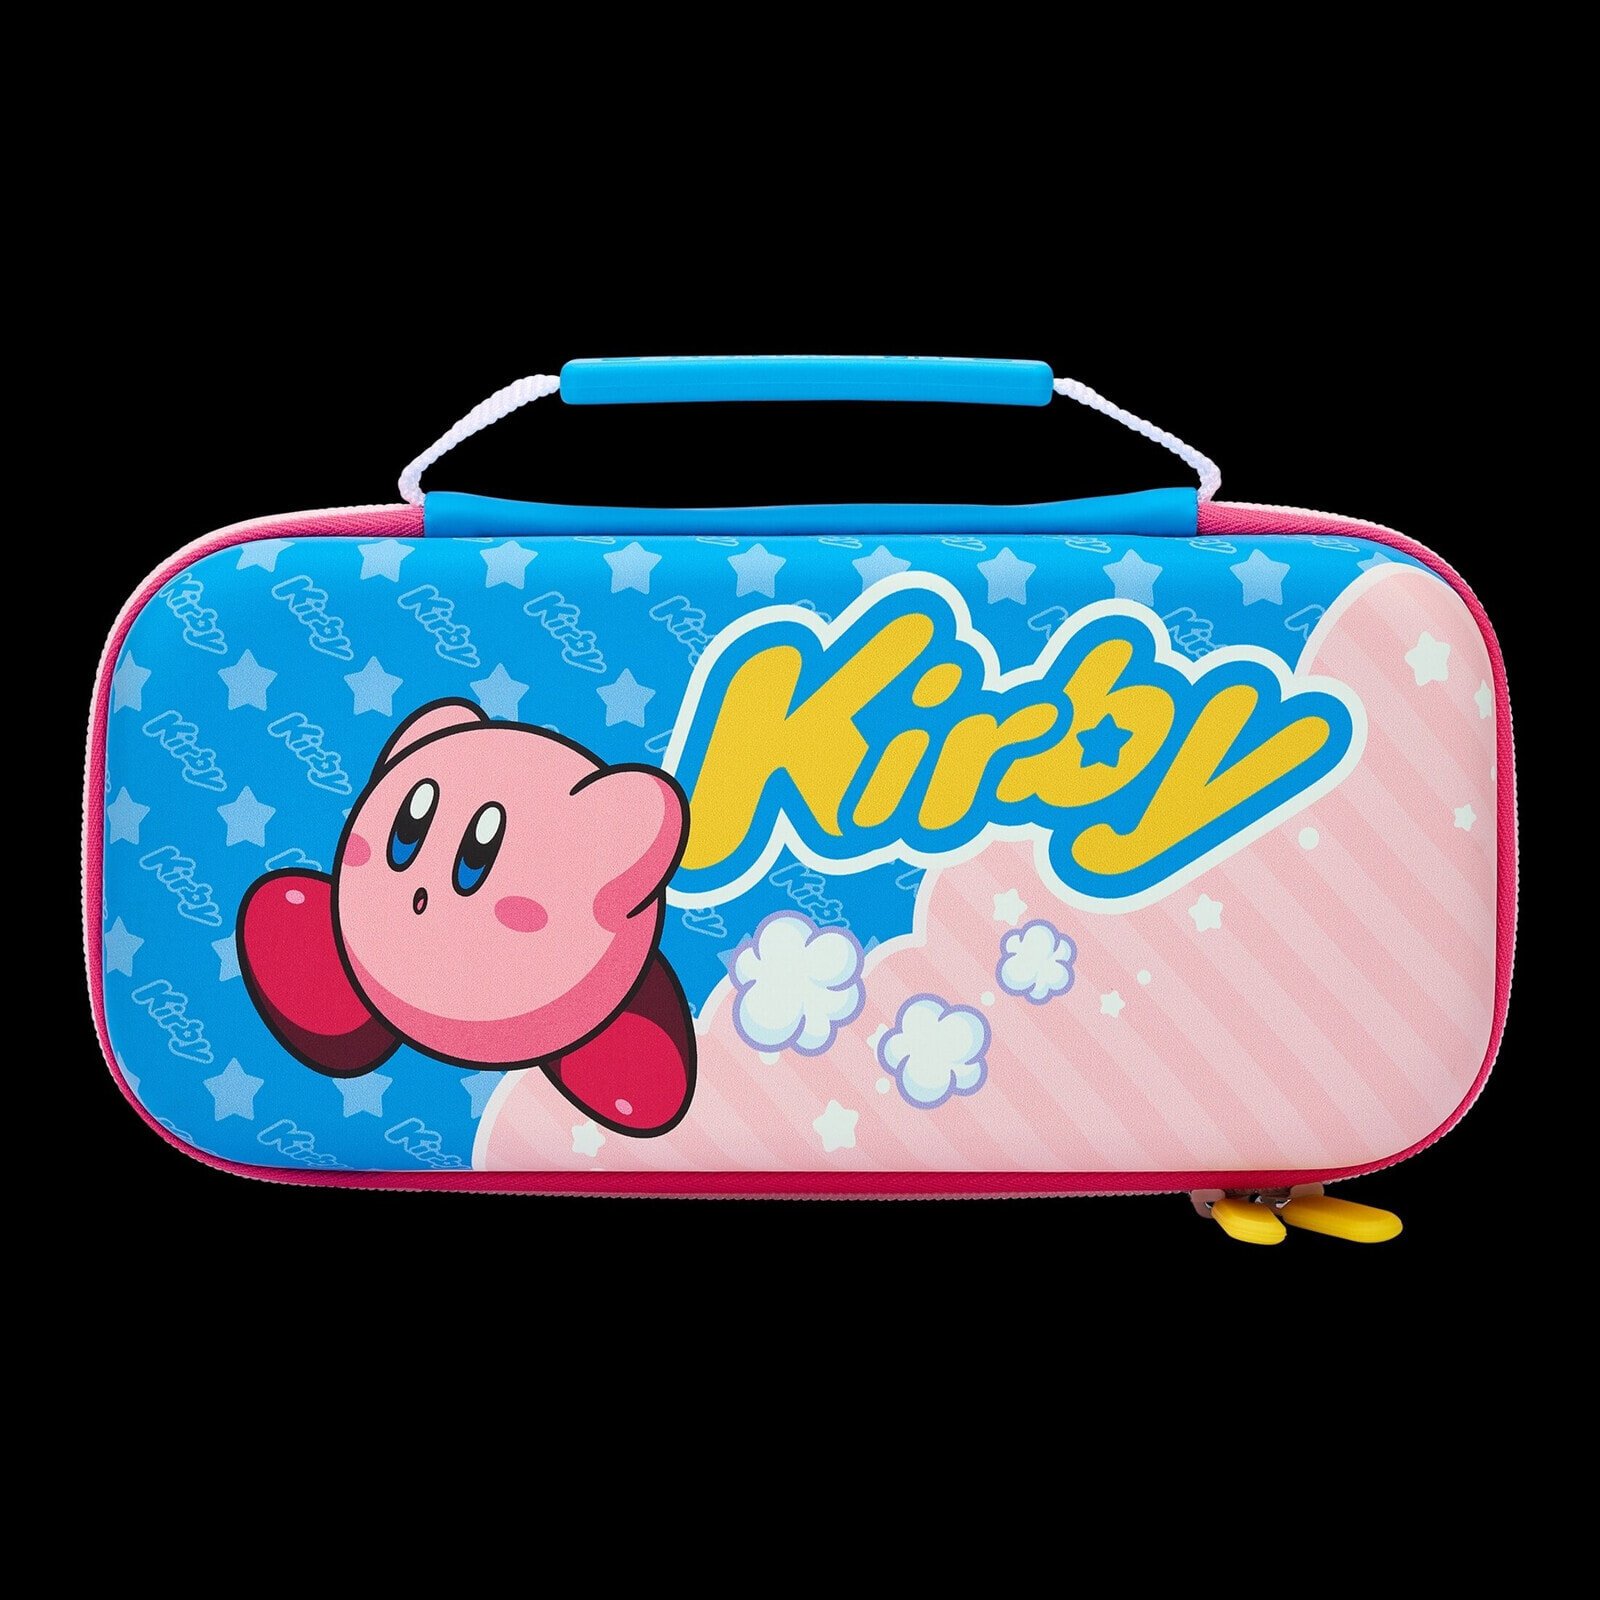 Protection Case for Nintendo Switch - OLED Model - Nintendo Switch and Nintendo Switch Lite - Kirby - Nintendo Switch - Gaming controller case - Multicolour - Nintendo - 1 pc(s)